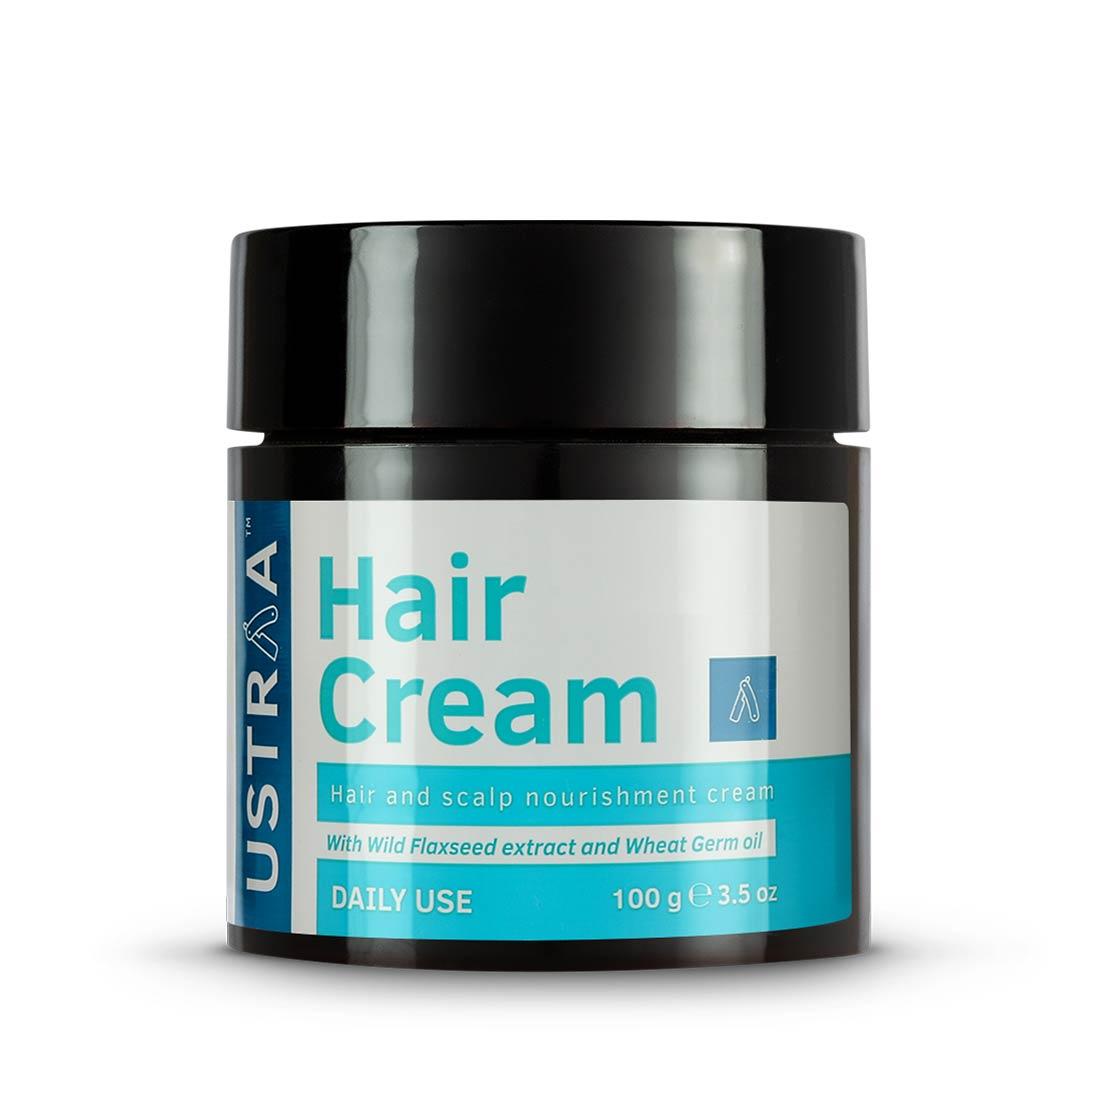 haircream, haircreamdailycream, Ustraa Hair Cream for men - Daily Use - Non-sticky alternative for oil with the Benefits of Almond, Wheatgerm, Olive and Wild Flaxseeds  - 100g 